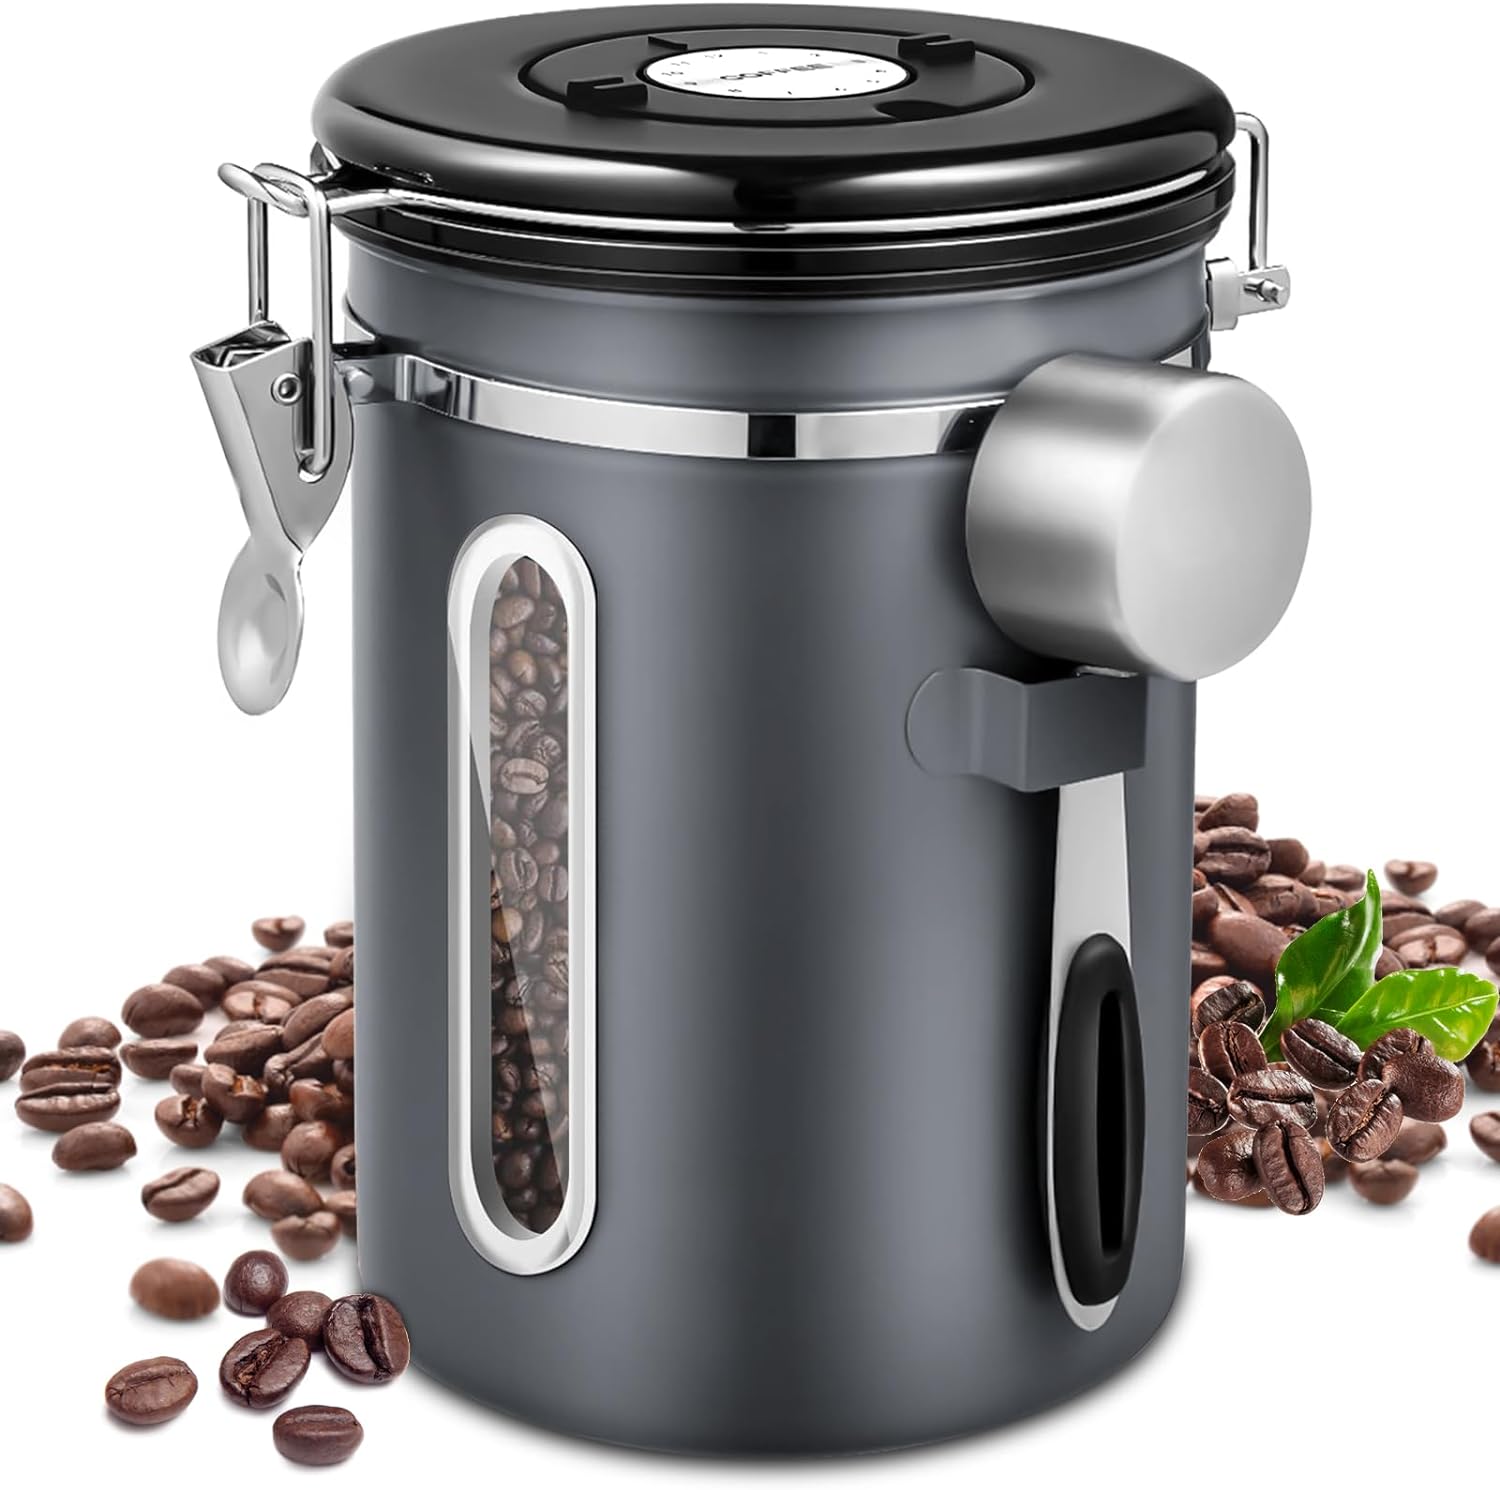 NCKIHRKK Airtight Stainless Steel Coffee Canister, 1.8 L Coffee Beans Container Made of Stainless Steel with Date Display and Portioner, Coffee Beans Container Storage Container for the Aroma